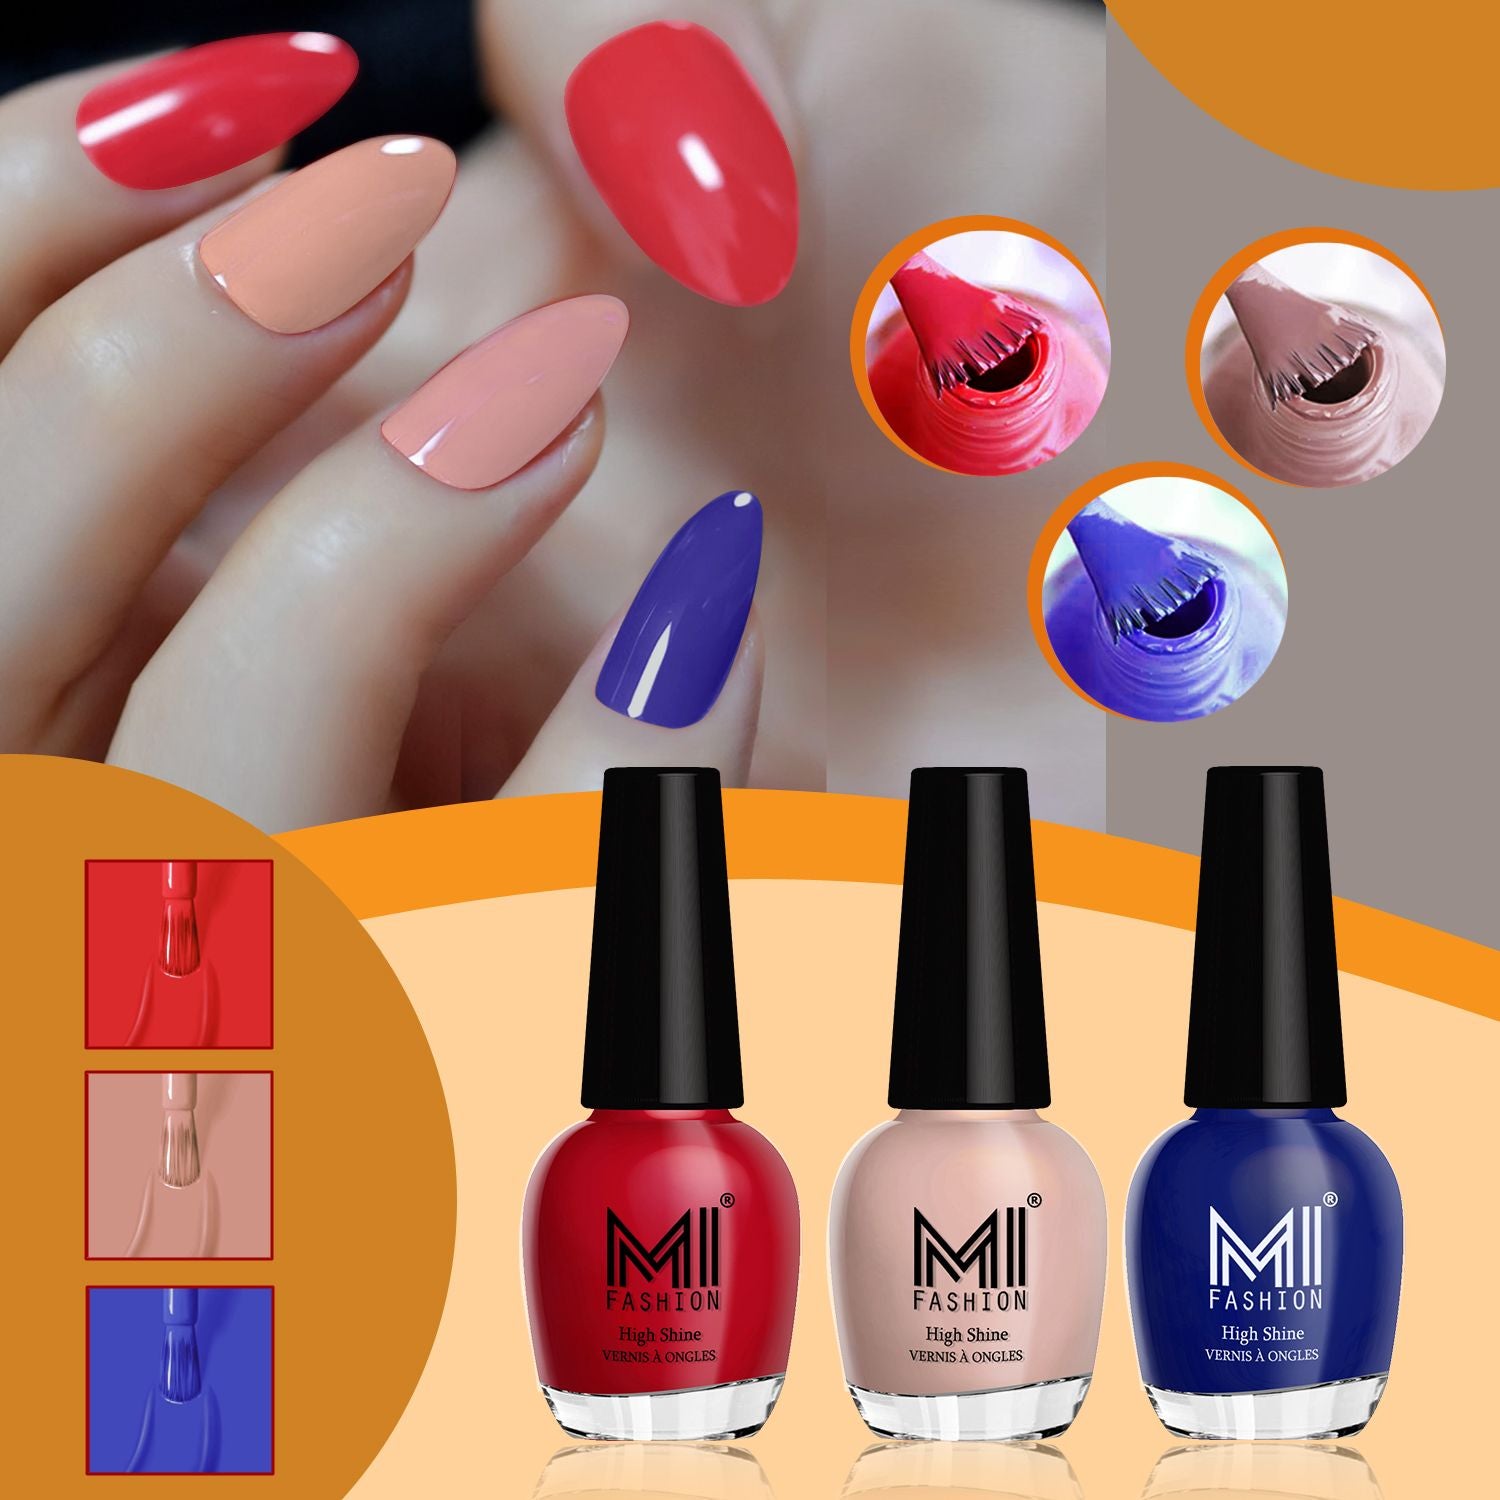 Elevate Your Nail Game with MI Fashion's 3pc Pack of Shine Nail Polish